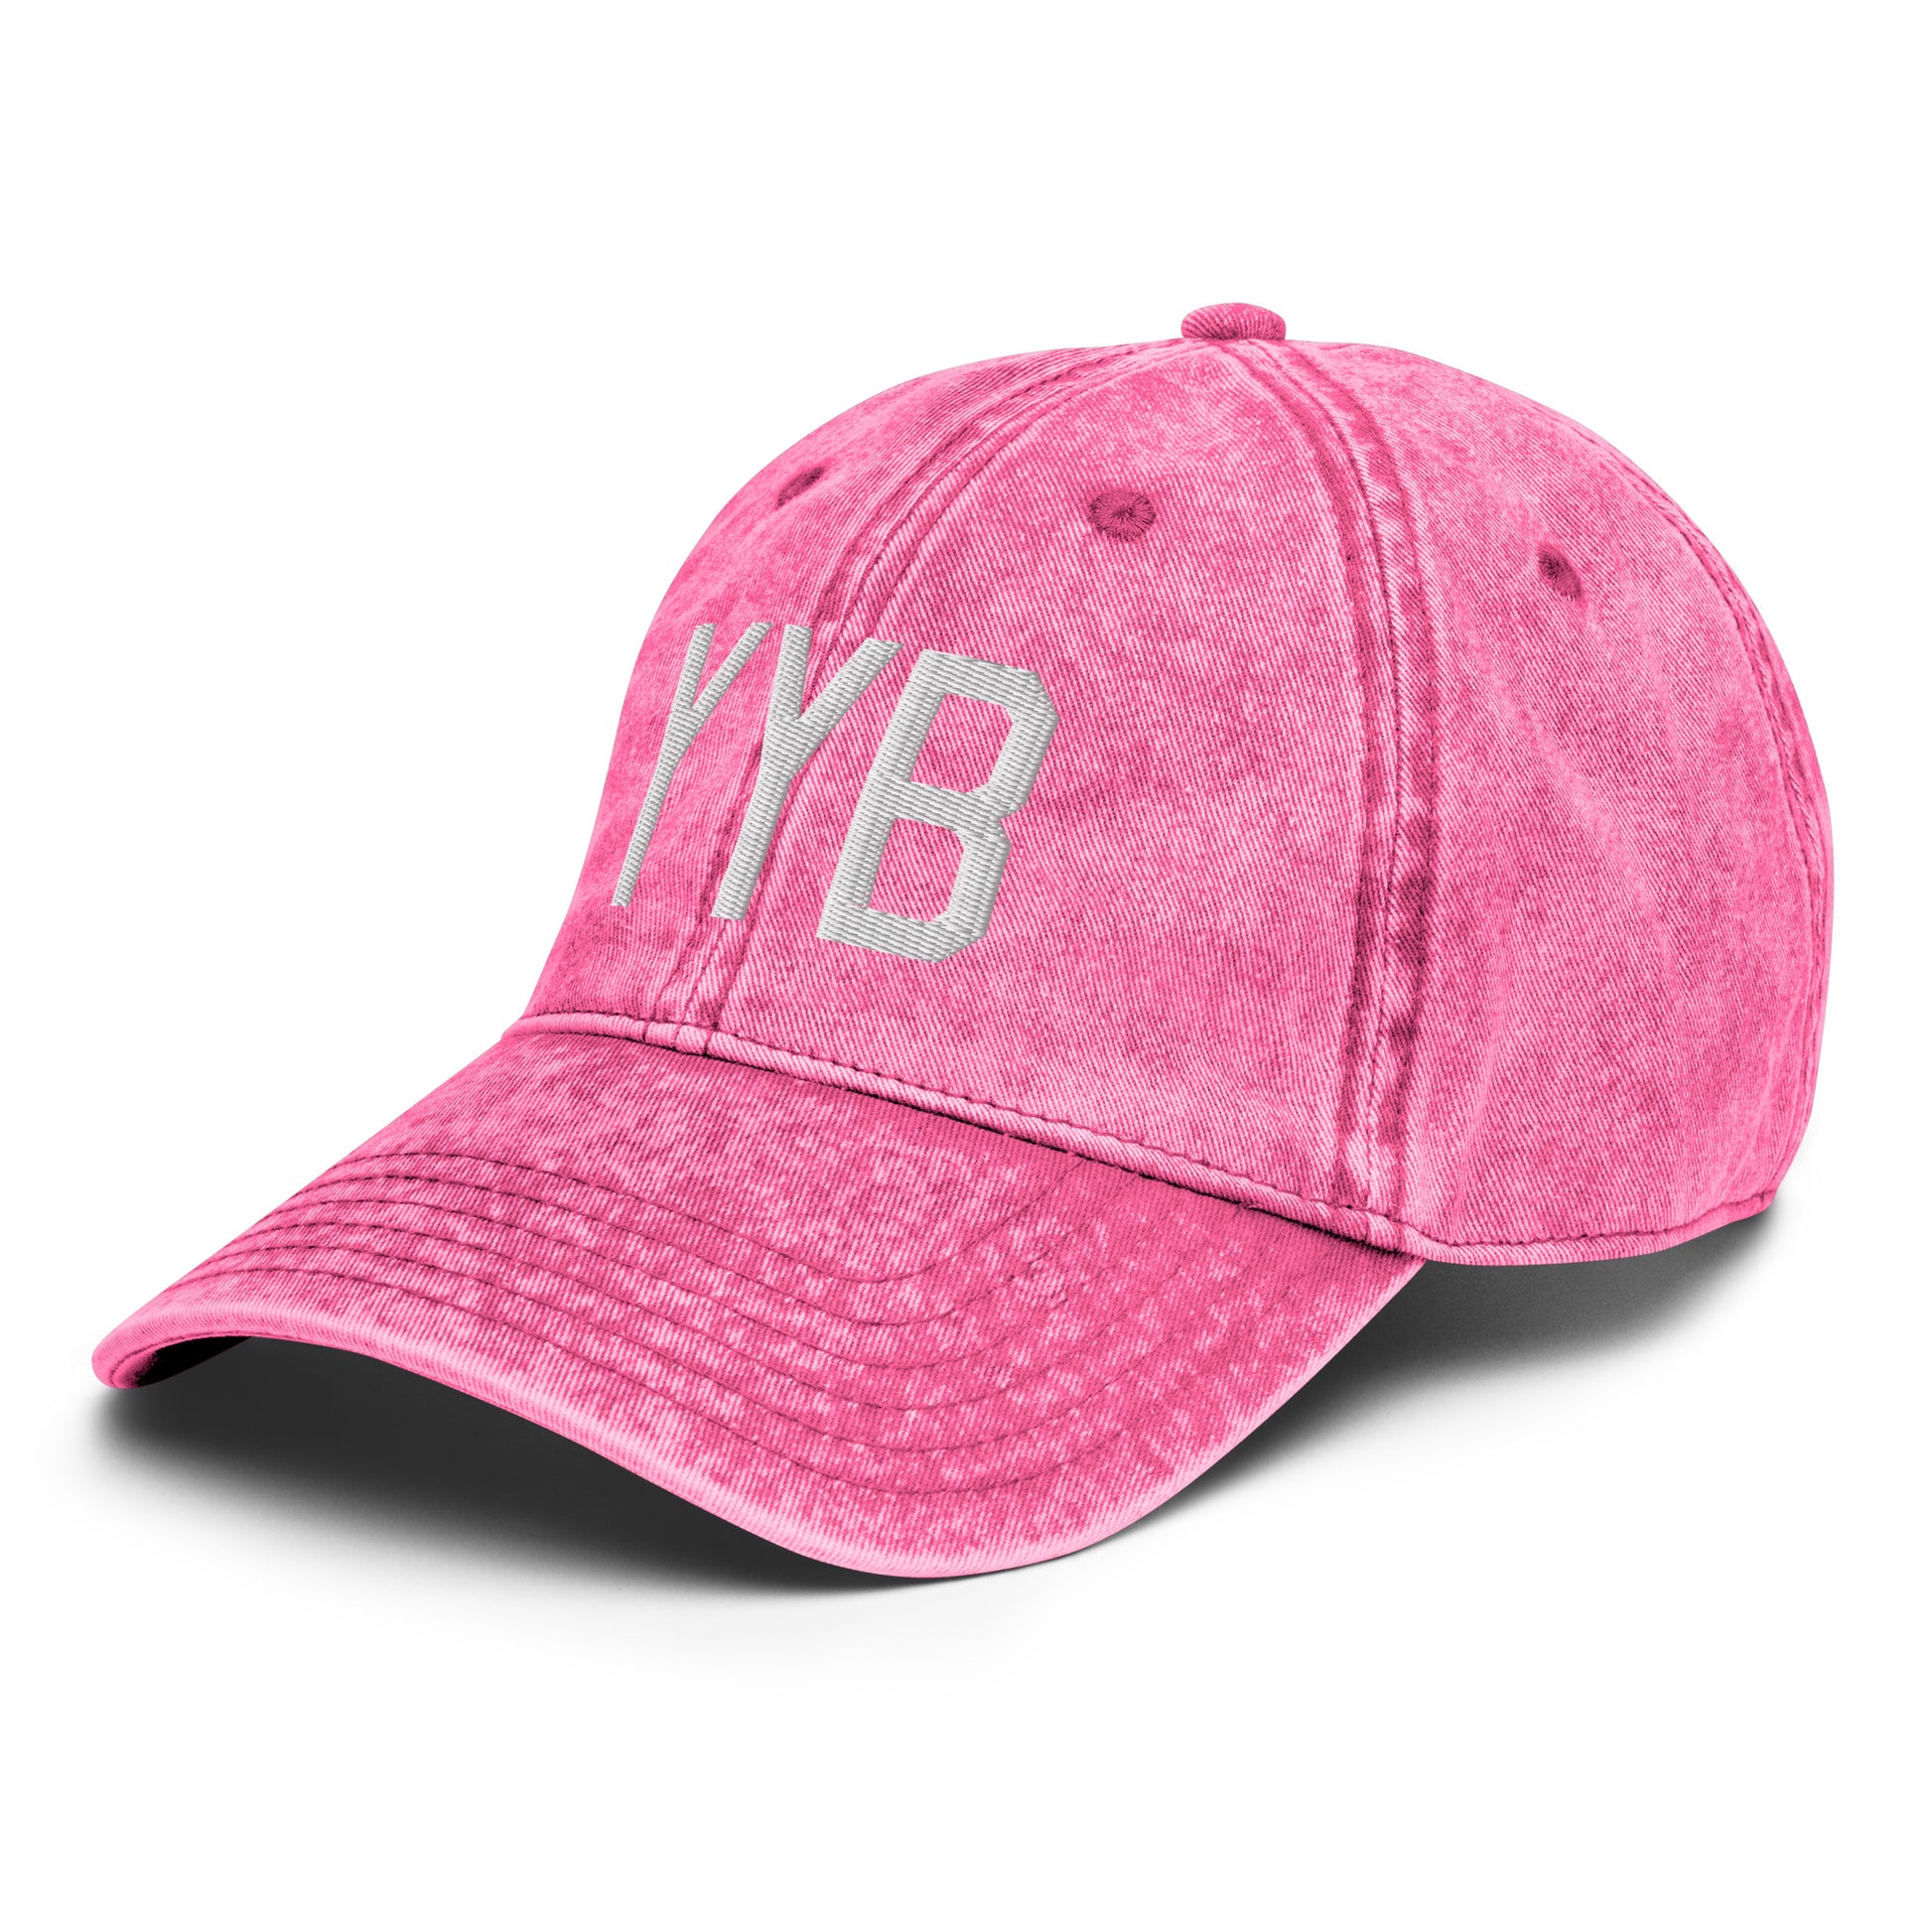 Airport Code Twill Cap - White • YYB North Bay • YHM Designs - Image 26